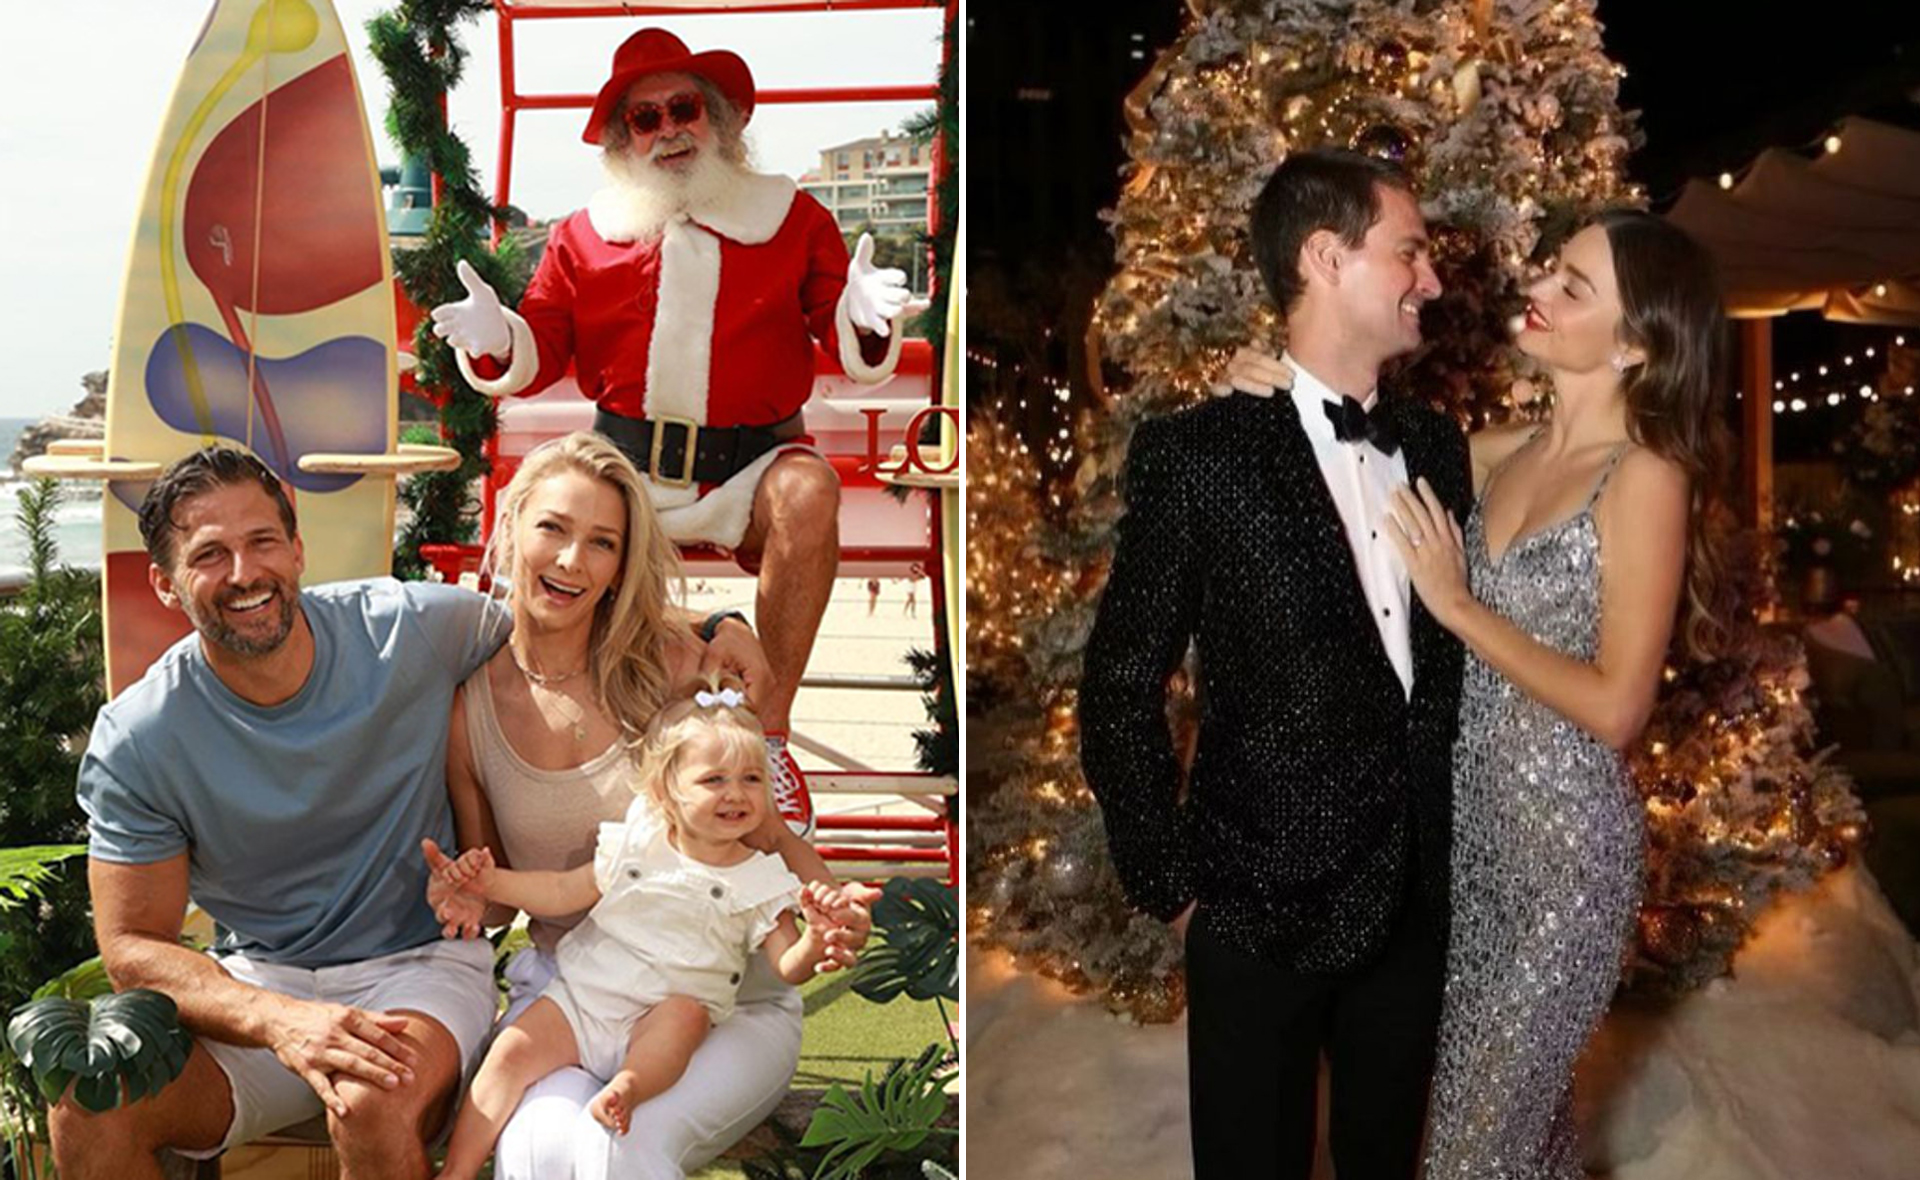 Let’s get merry! These celebrities are getting into the Christmas spirit, and Santa couldn’t be more starstruck